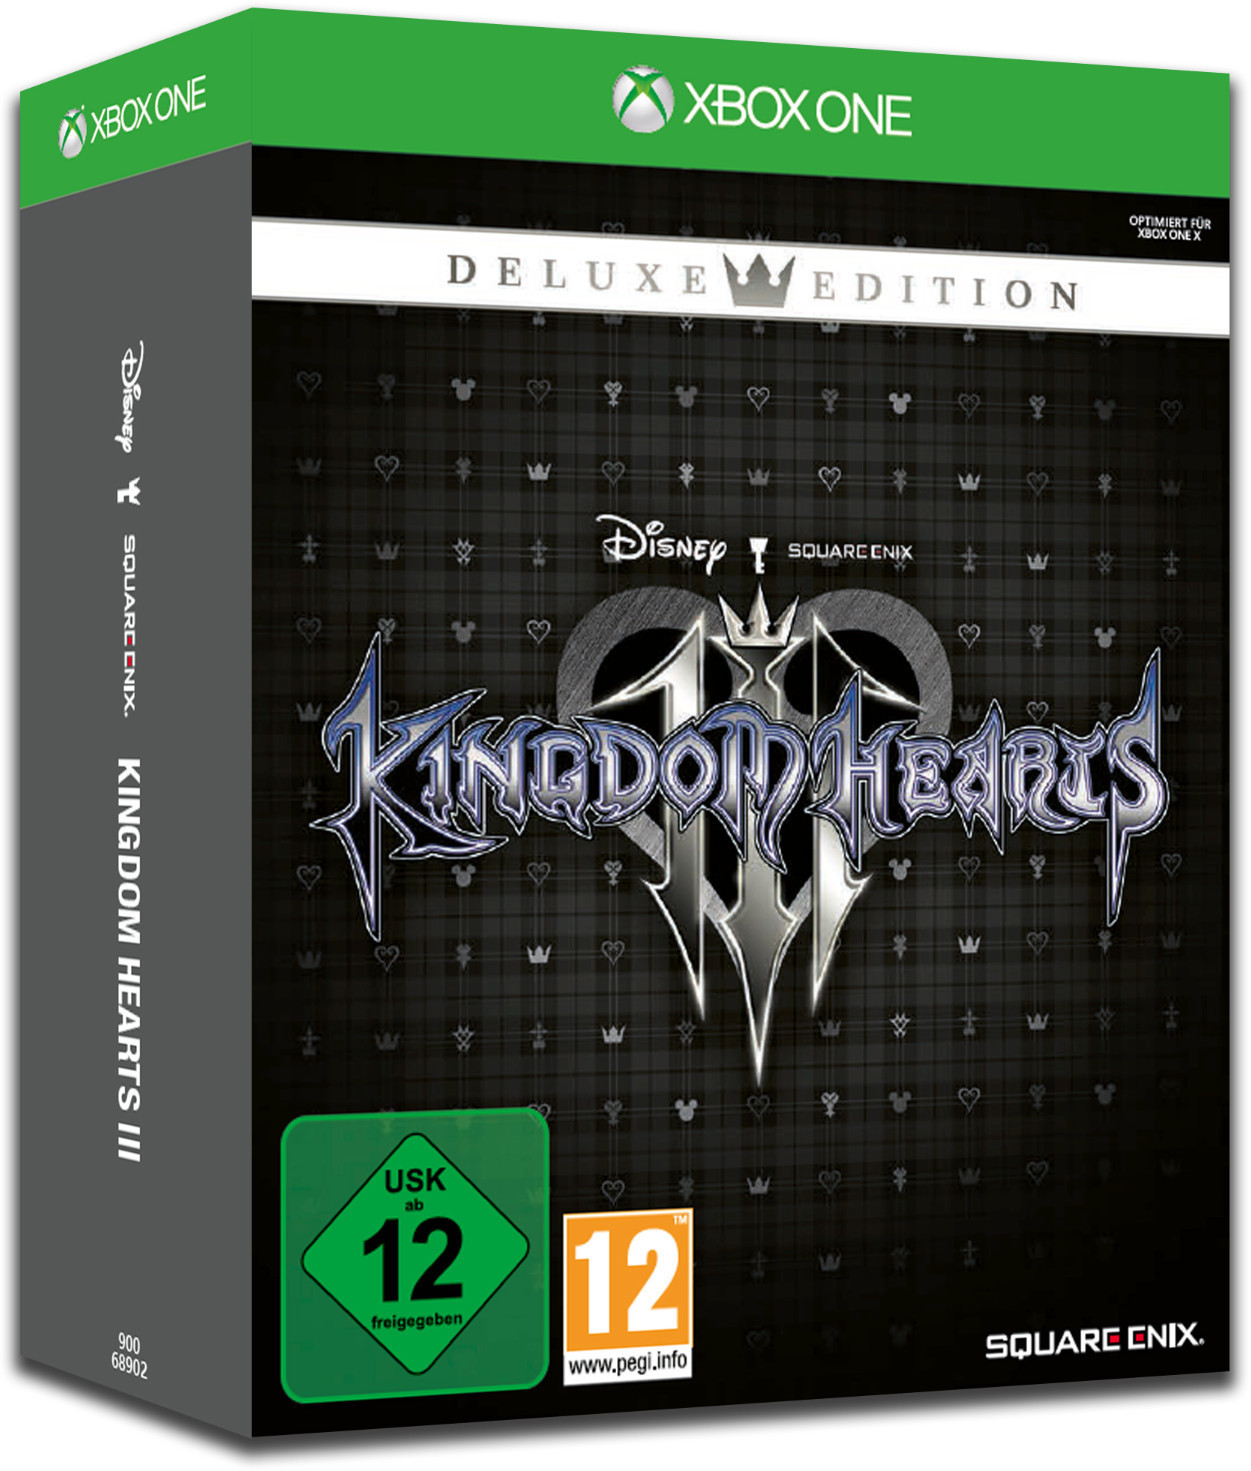 will the standard box art be in kingdom hearts 3 deluxe edition